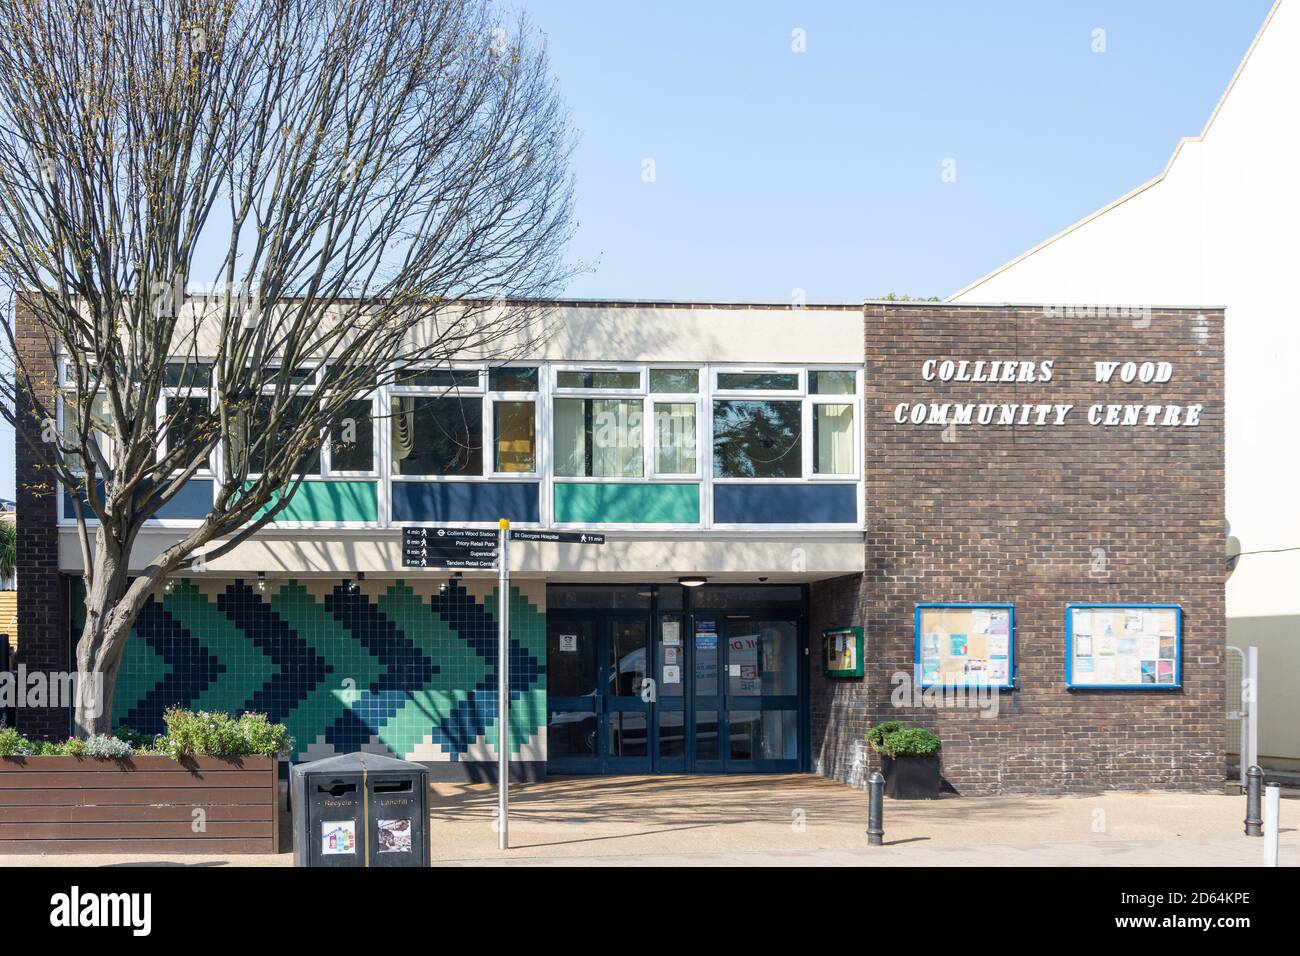 Colliers Wood Community Centre, High Street, Colliers Wood, London Borough of Merton, Greater London, England, United Stock Photo